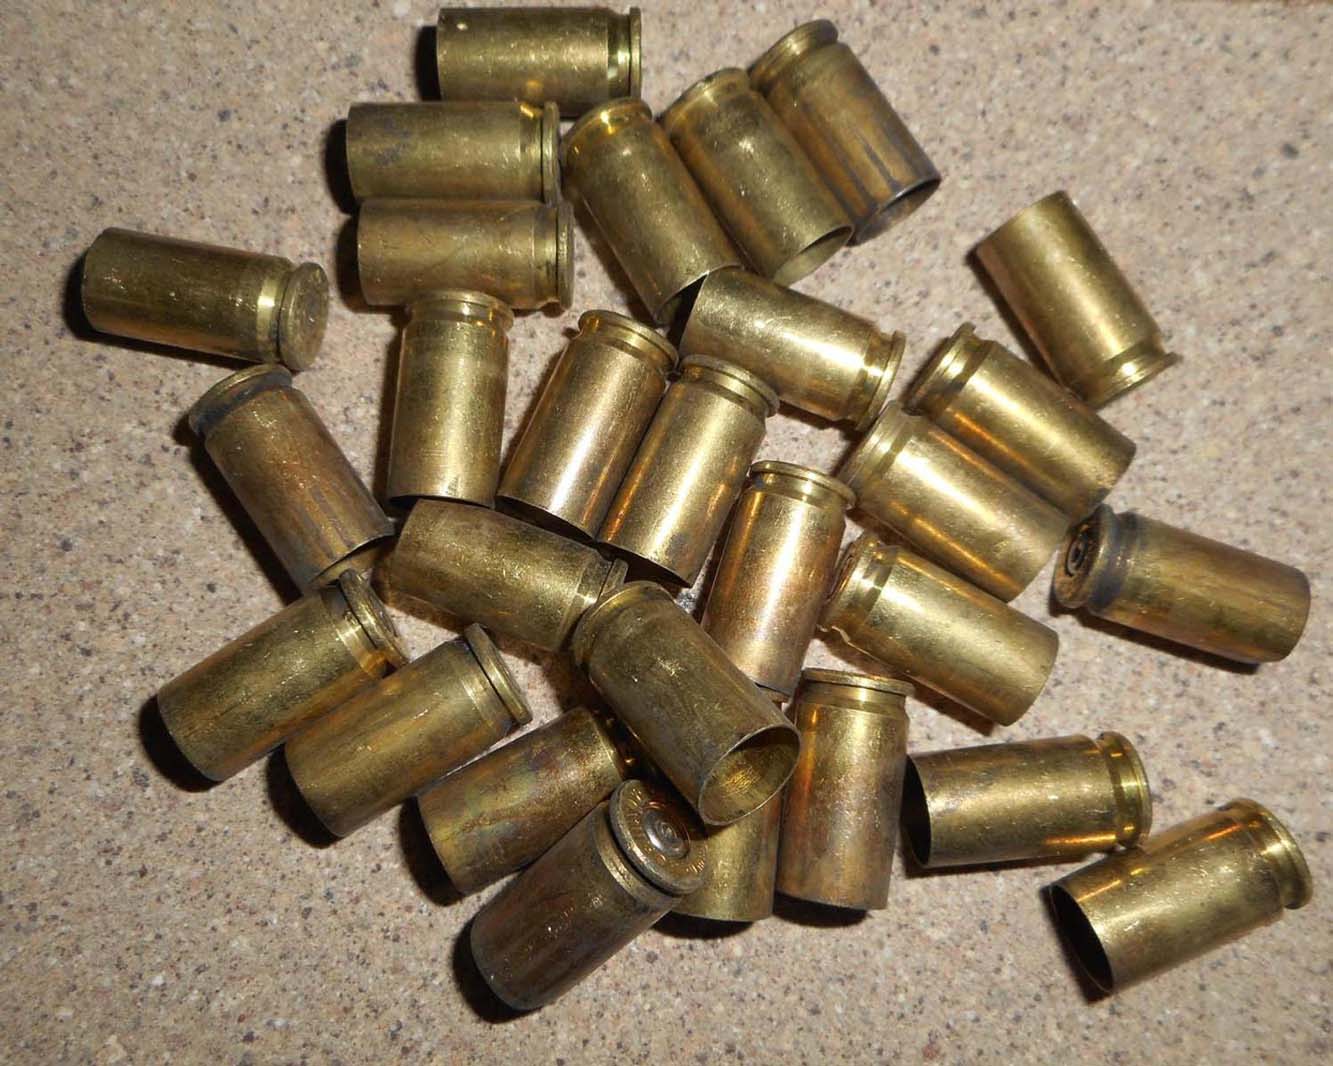 9mm brass once fired